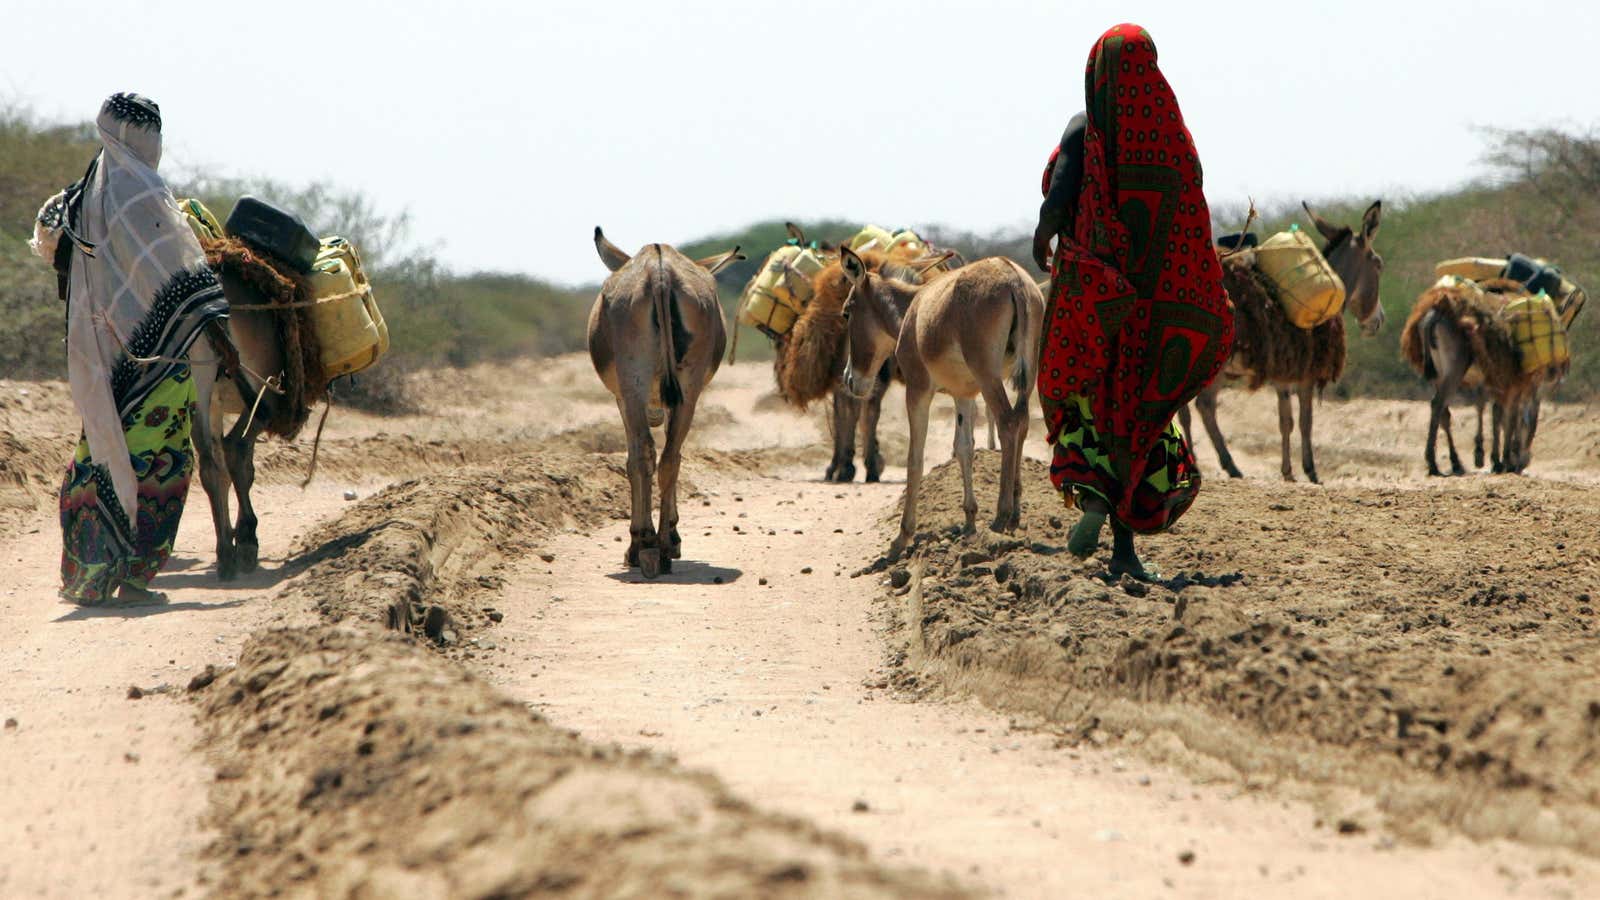 The Horn of Africa region is also grappling with political instability, locust infestations and the economic fallout of the covid-19 pandemic, undermining its ability to cope with the drought.